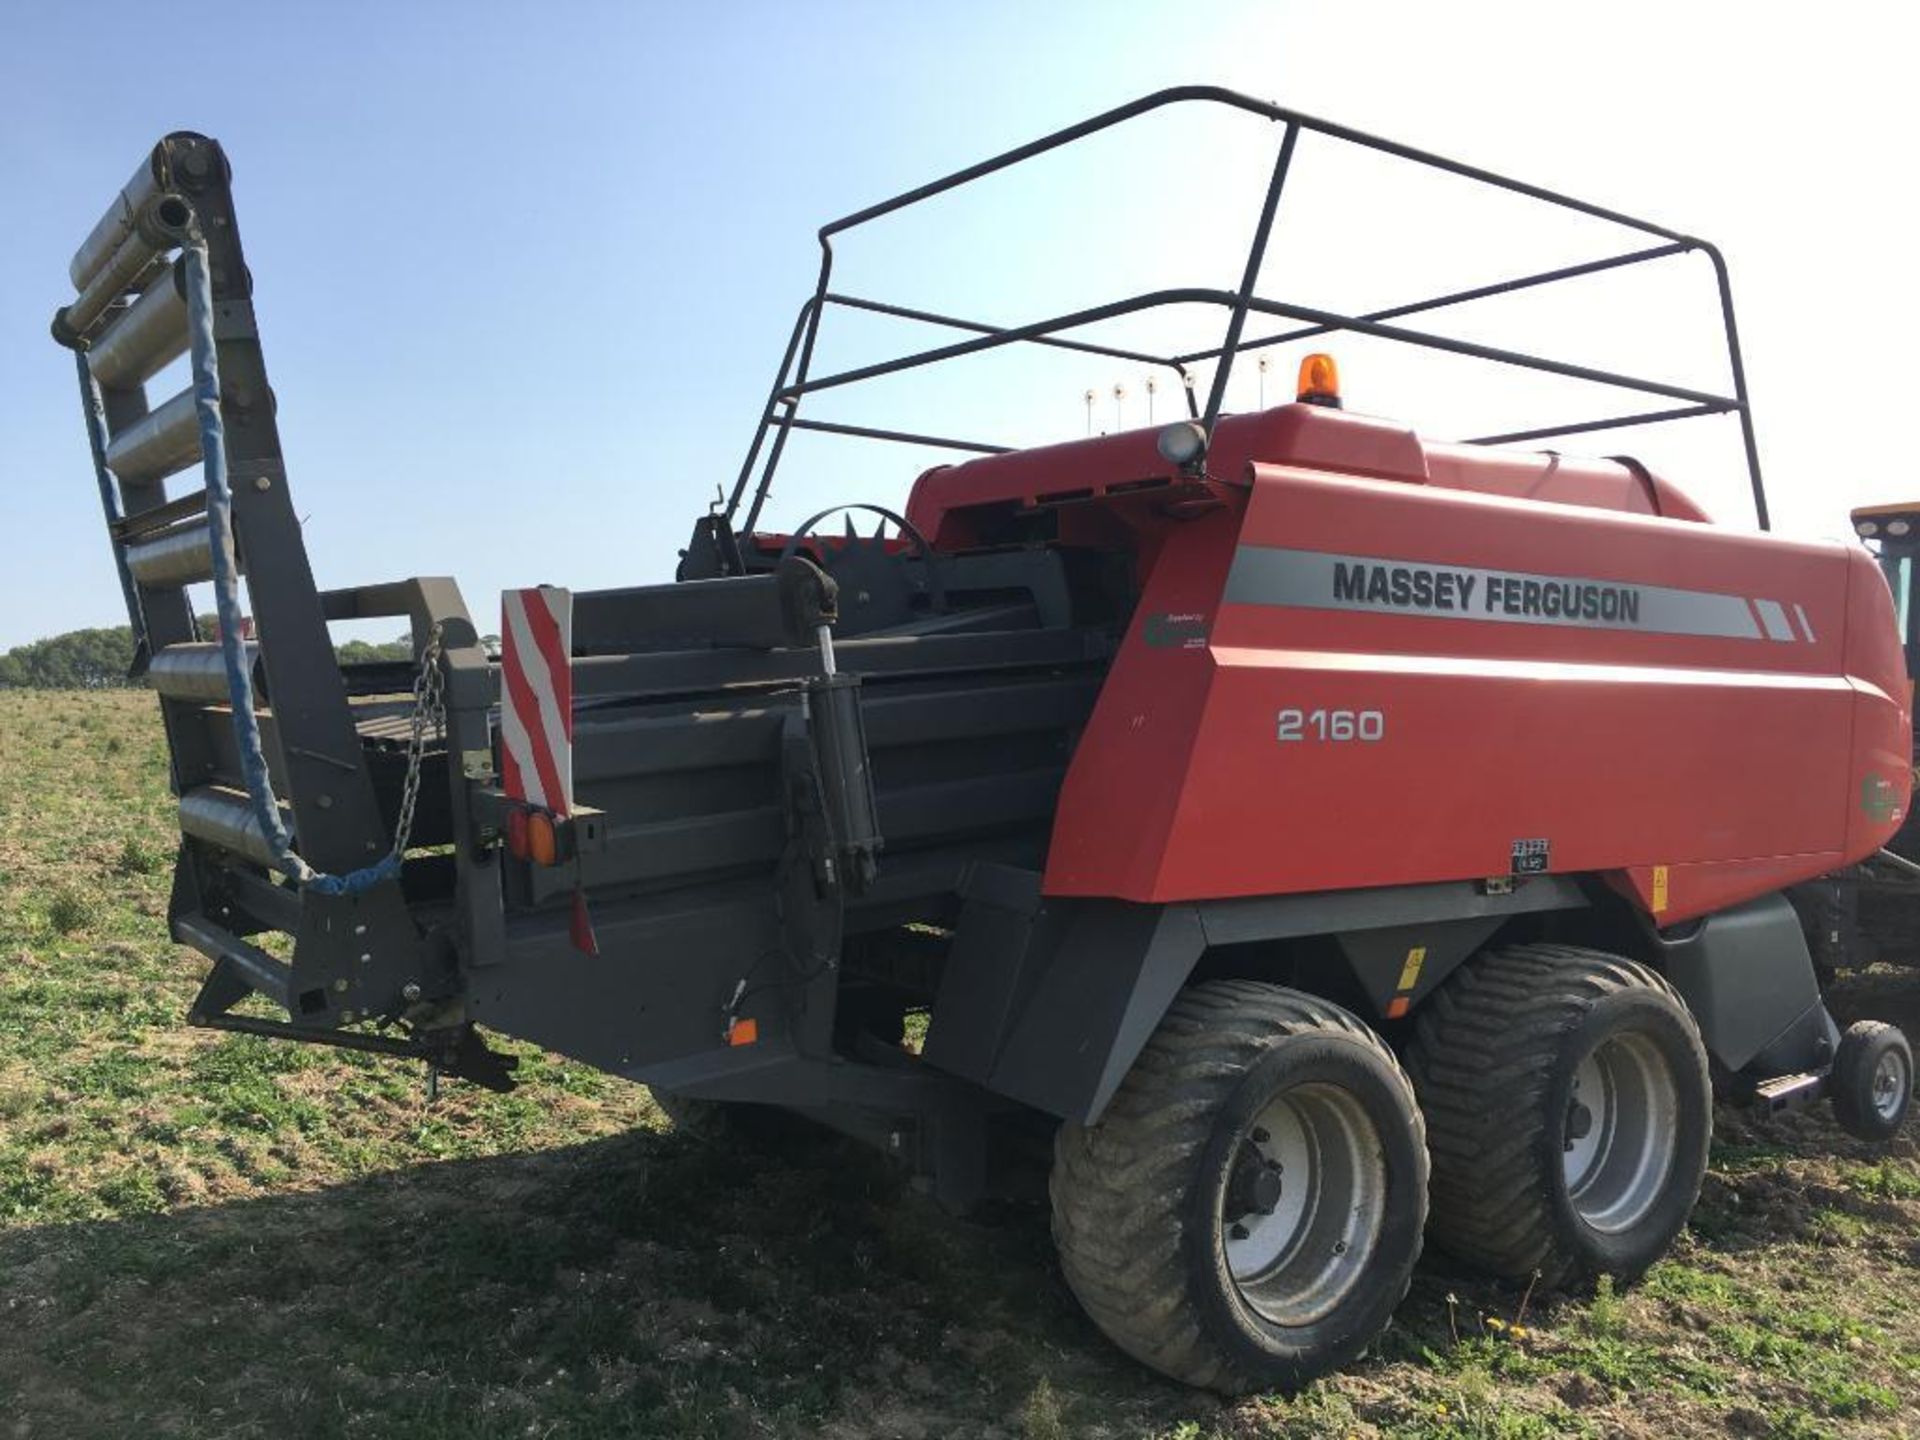 2008 Massey Ferguson MF2160 Big Baler twin axle with air and hydraulic brakes, 70x120 bale size. Ser - Image 28 of 32